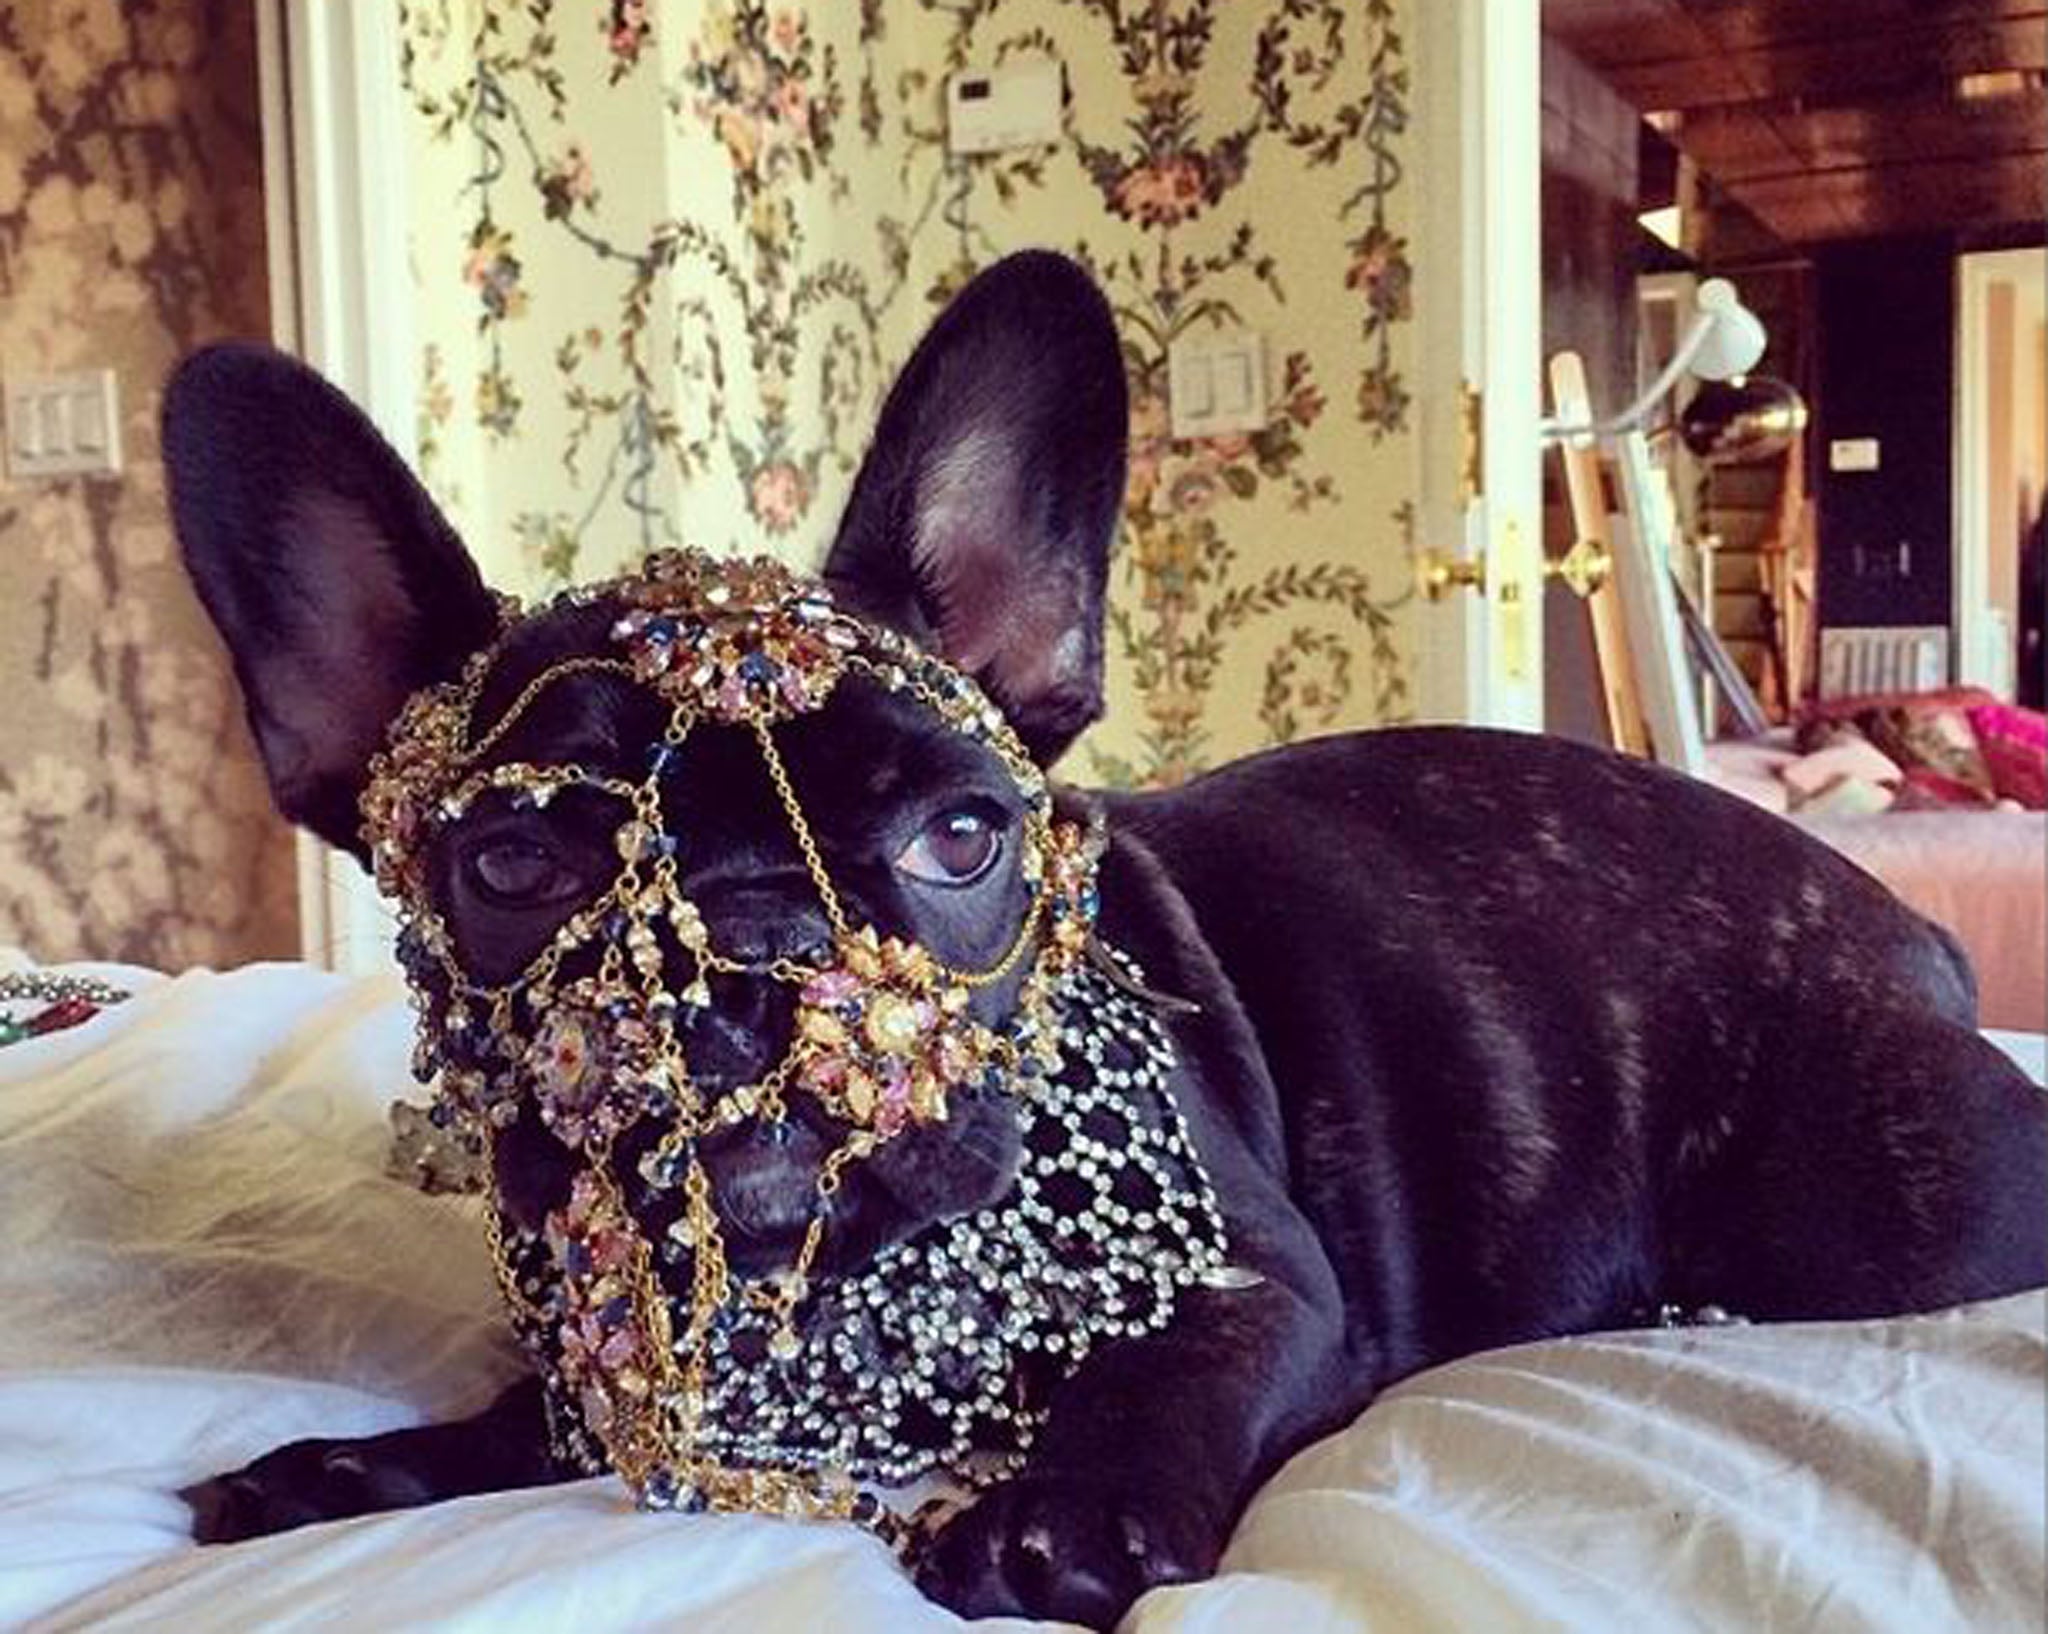 Asian Dog Porn - Lady Gaga criticised by PETA for dressing pet dog Asia in heavy costume  jewellery | The Independent | The Independent